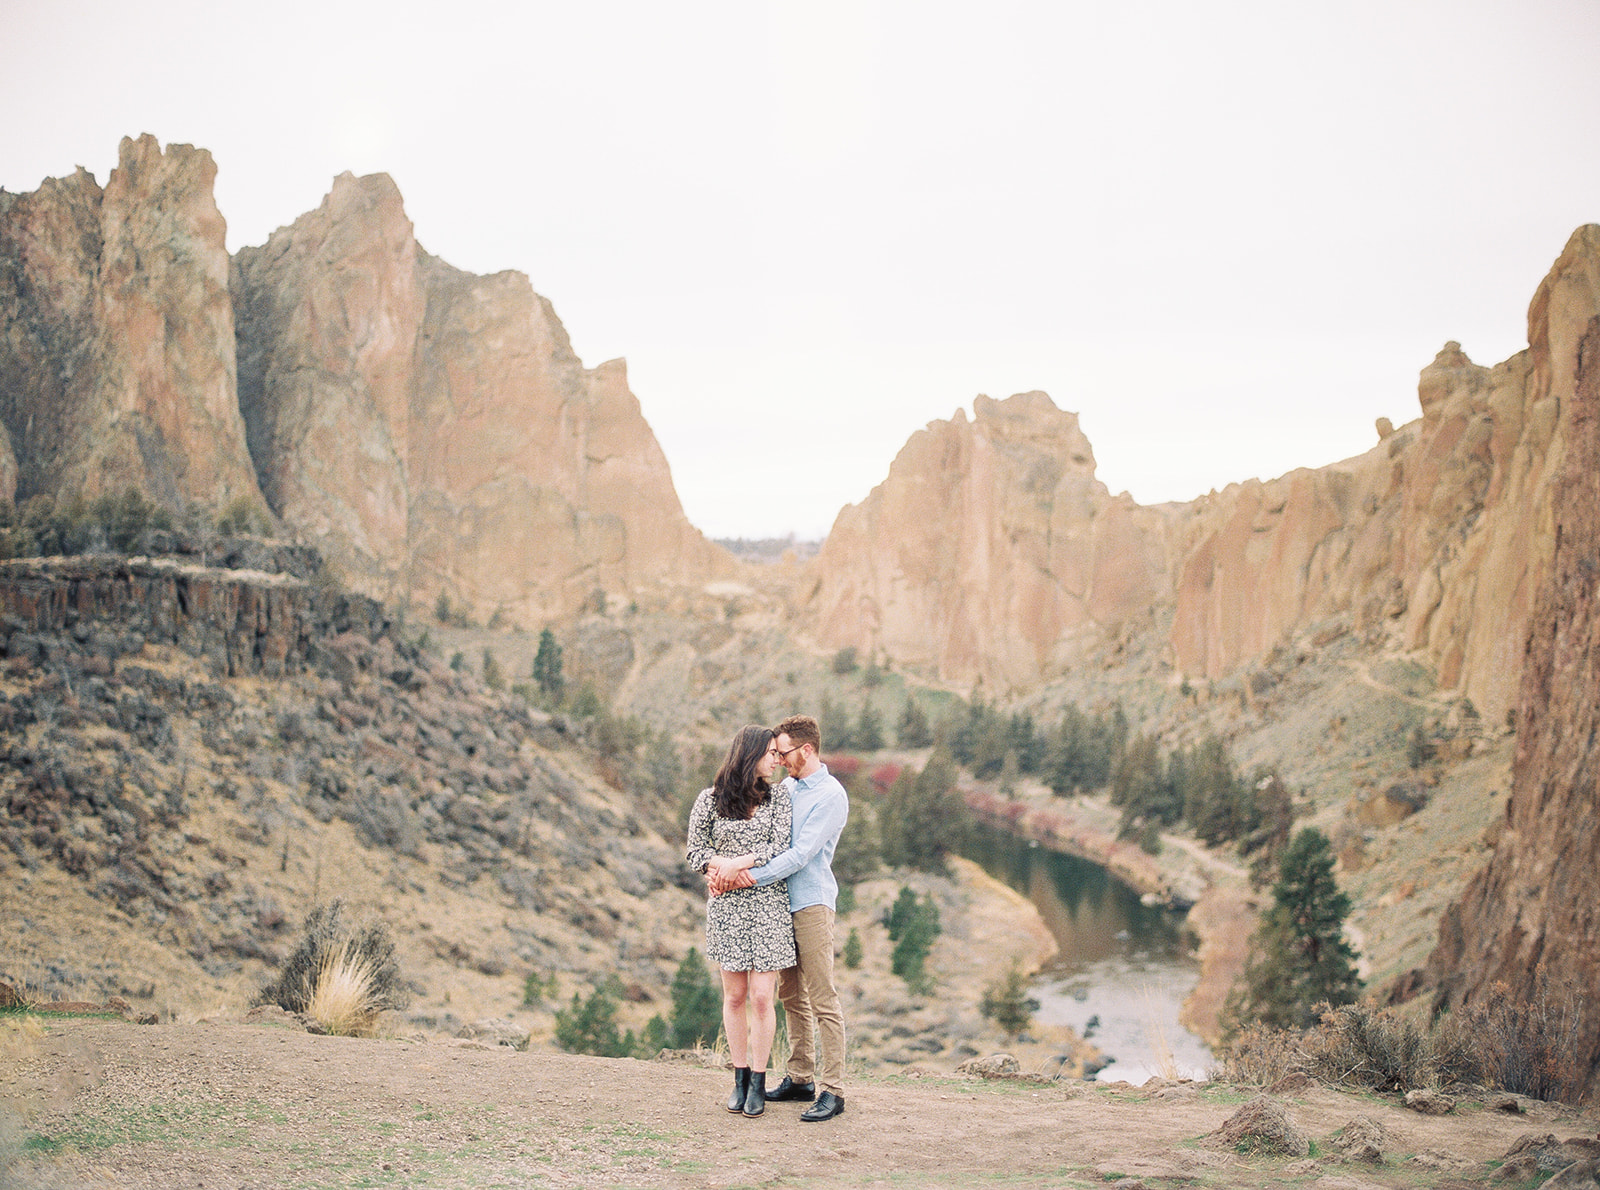 A couple enjoys the scenery with Smith Rock behind them